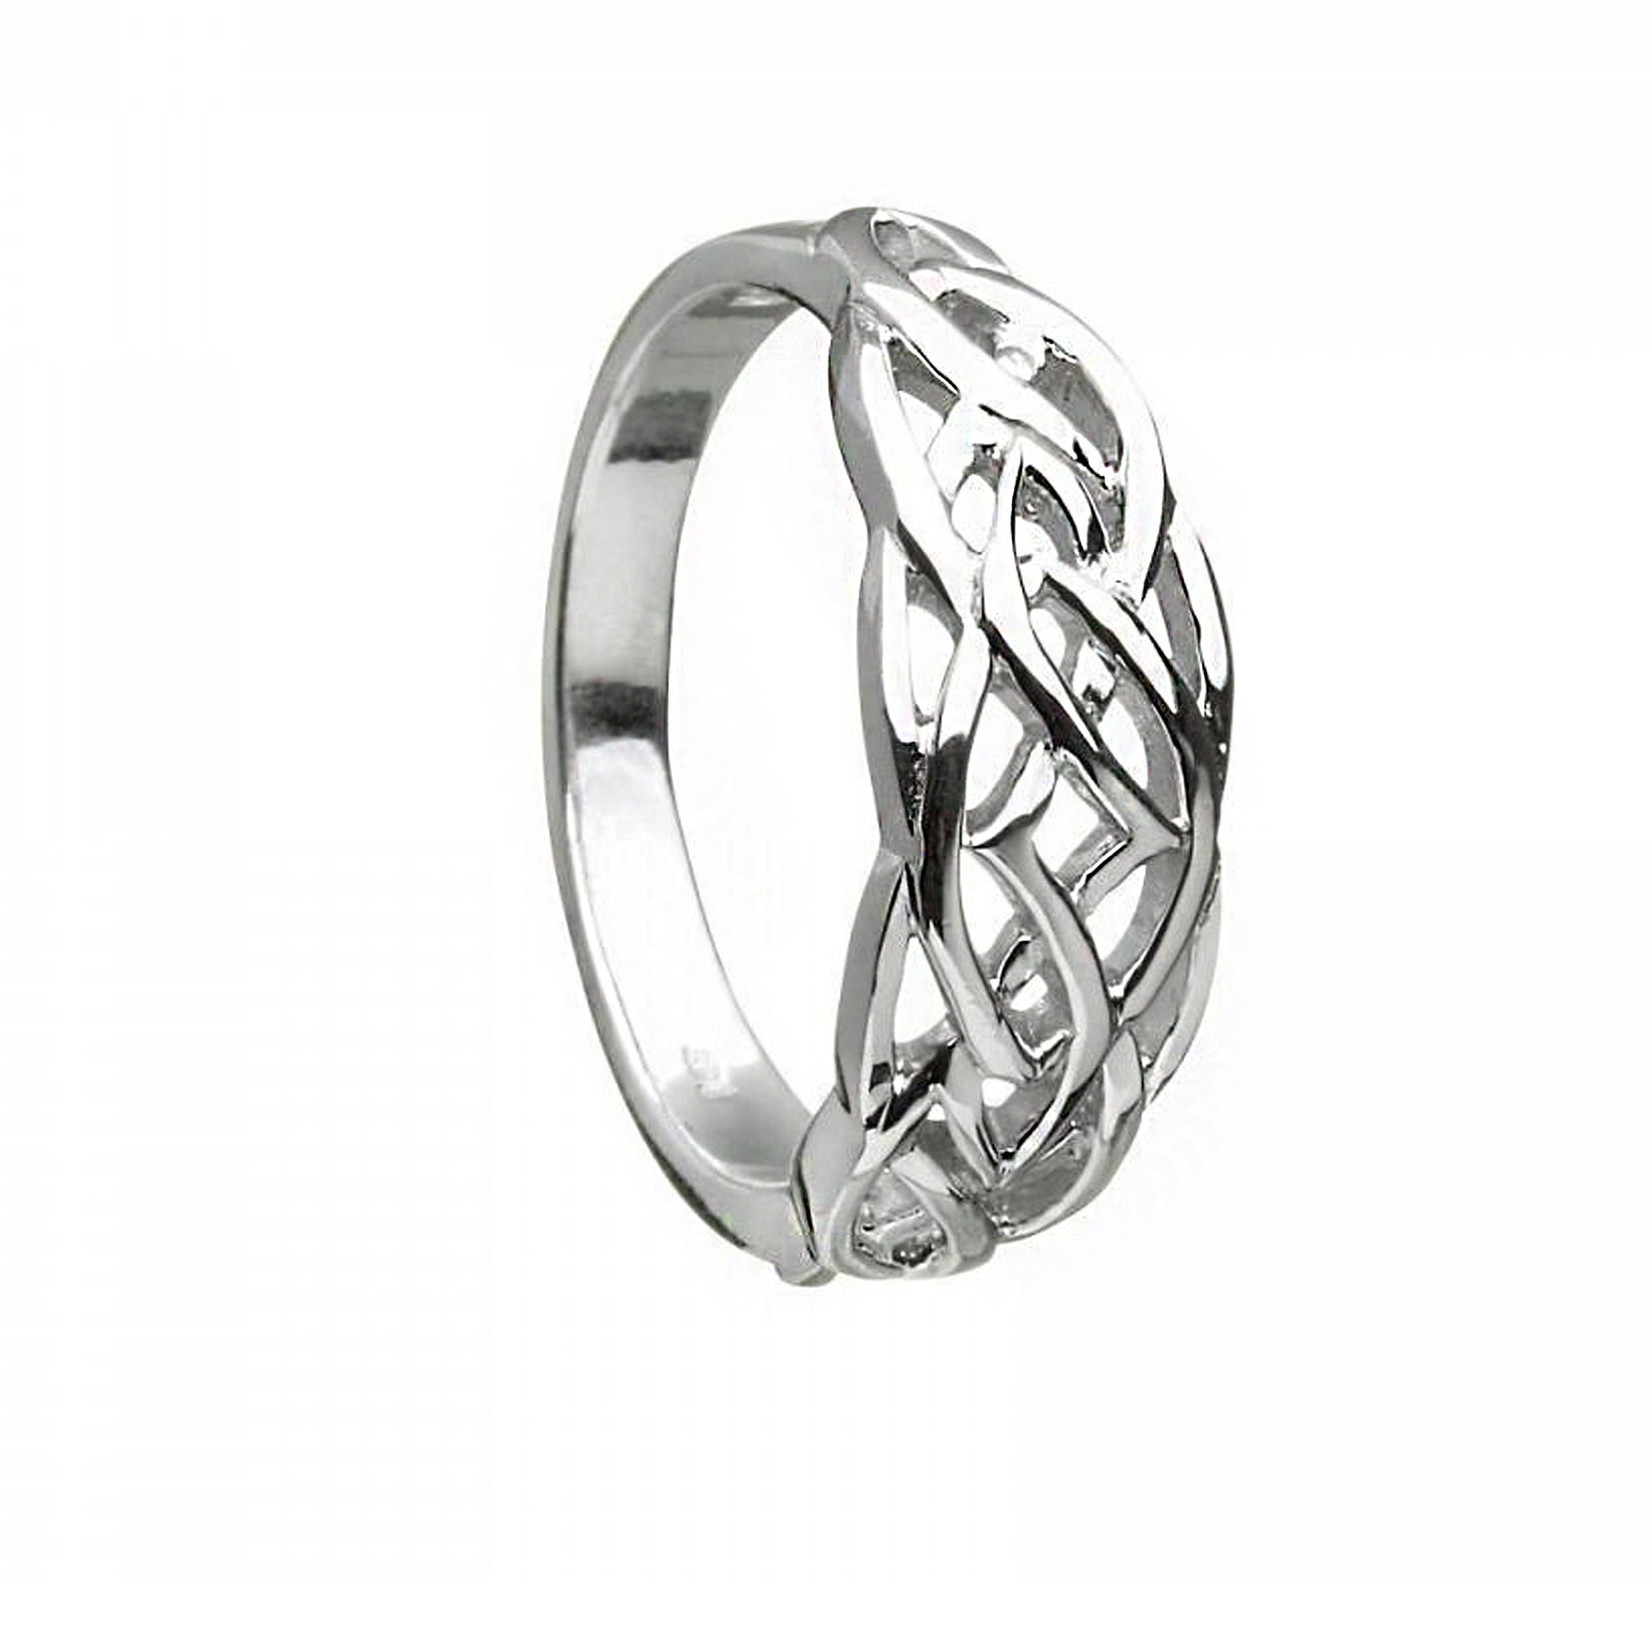 Anu Sterling Silver Celtic Weave Ring by Anu